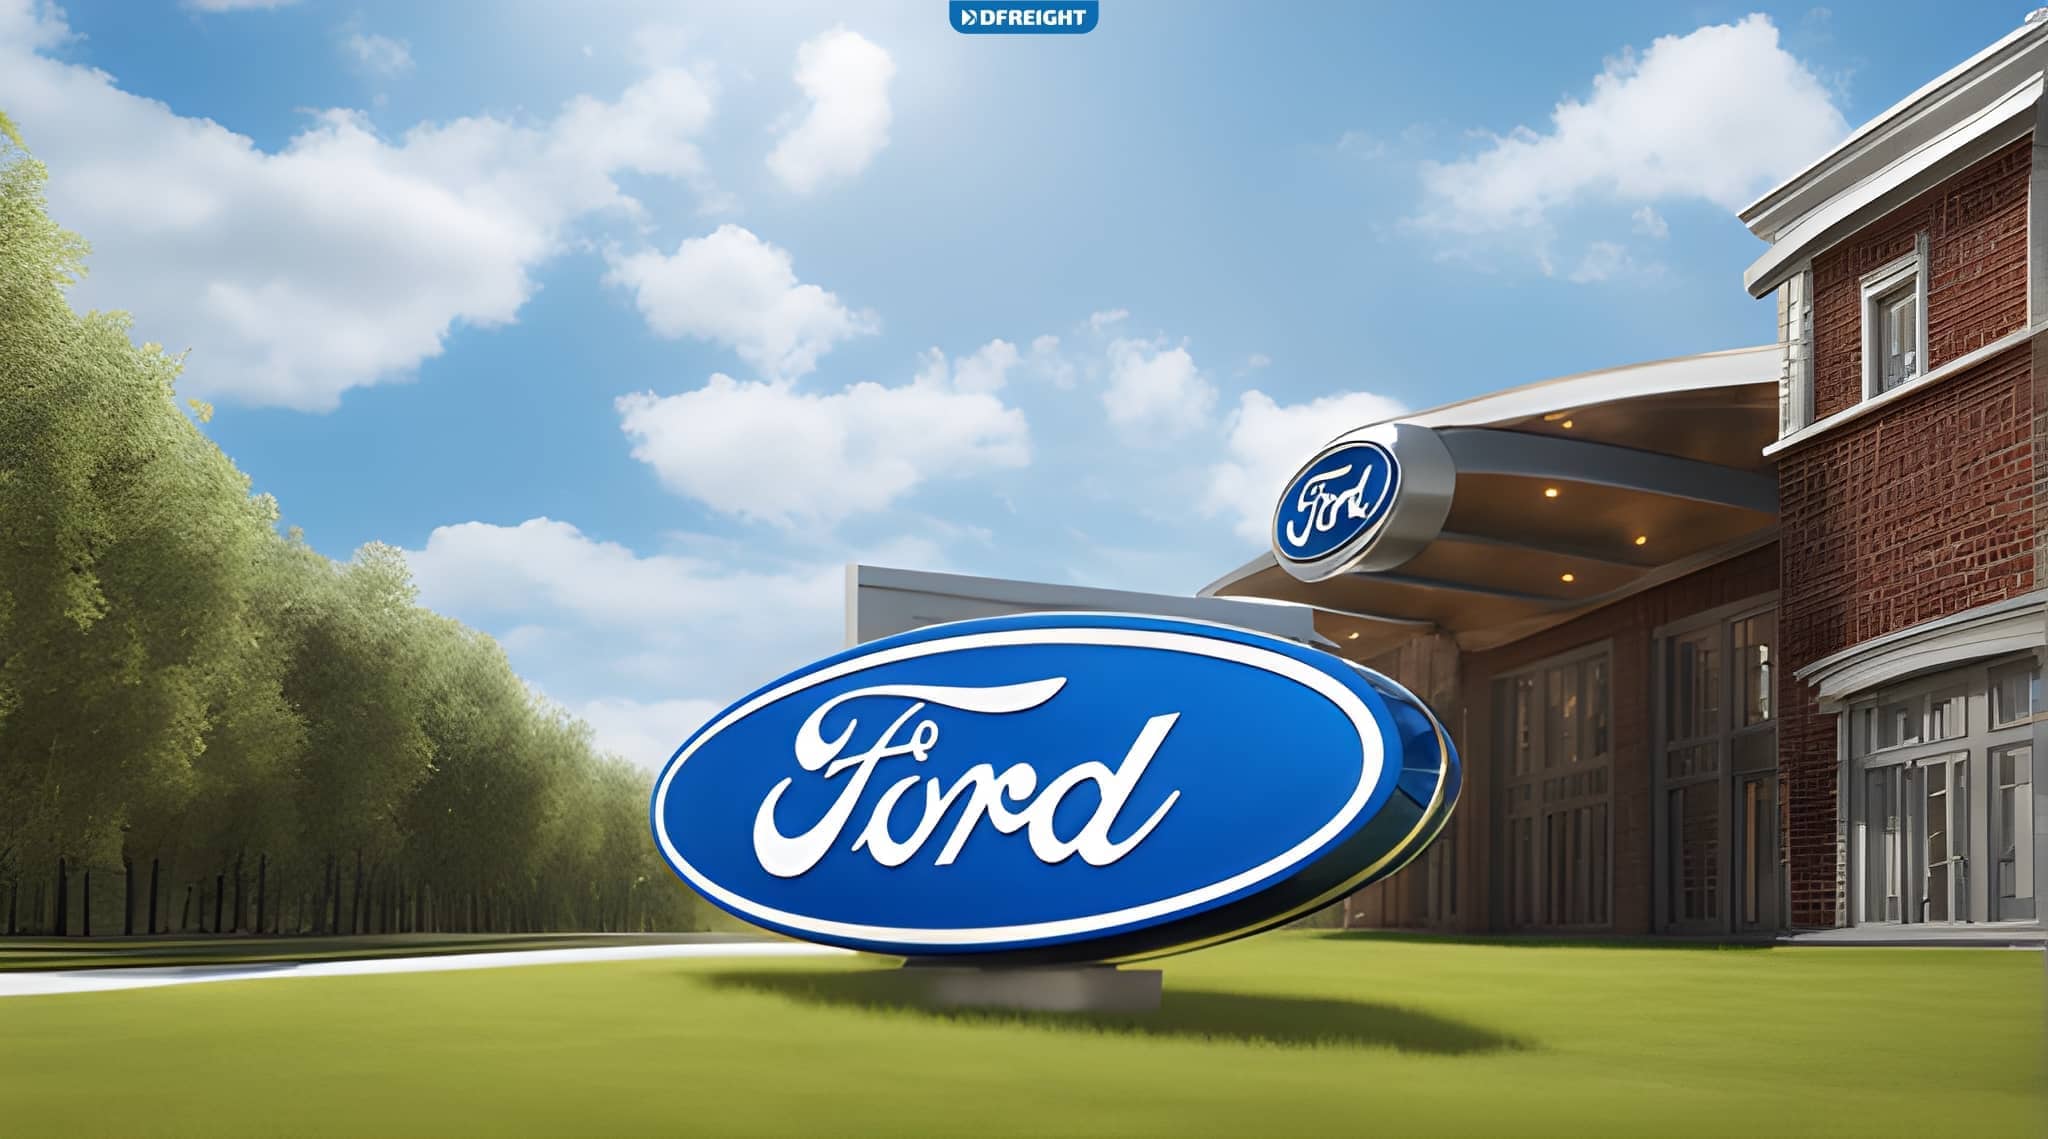 Efficiency in Motion: The Ford Supply Chain in Action